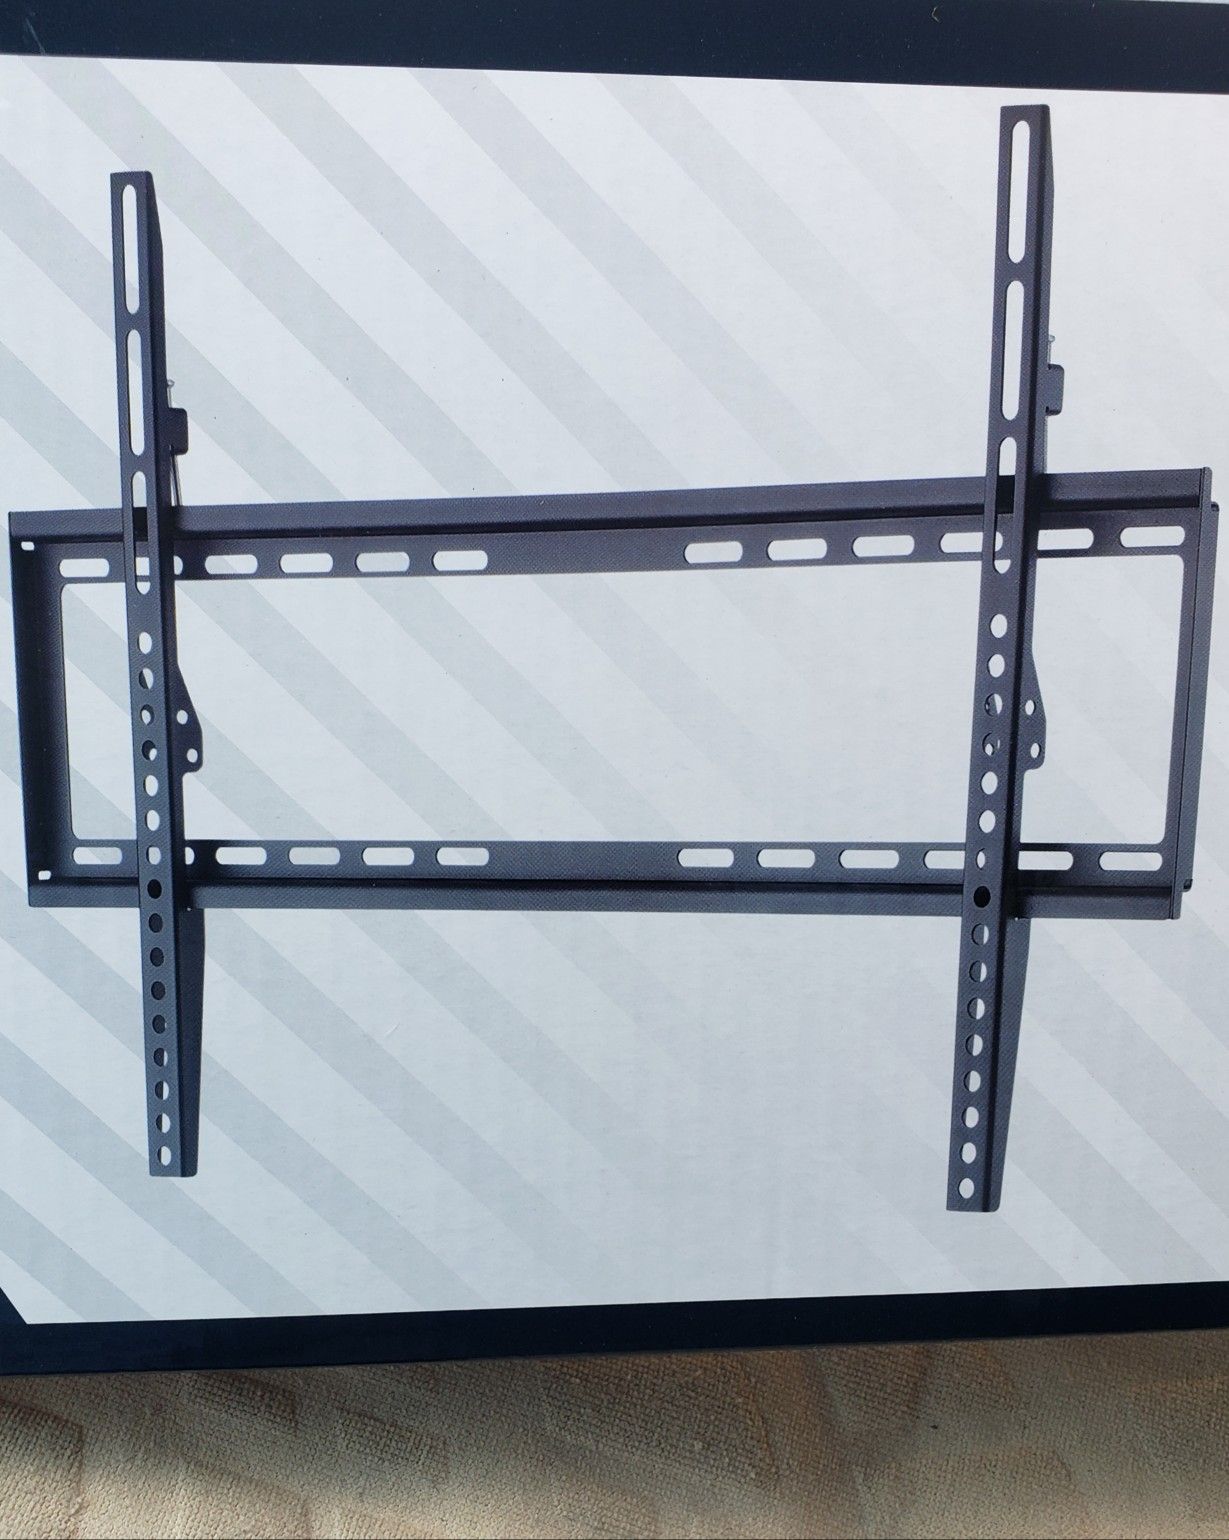 Tilt tv wall mount 24 to 70 inch... new in box